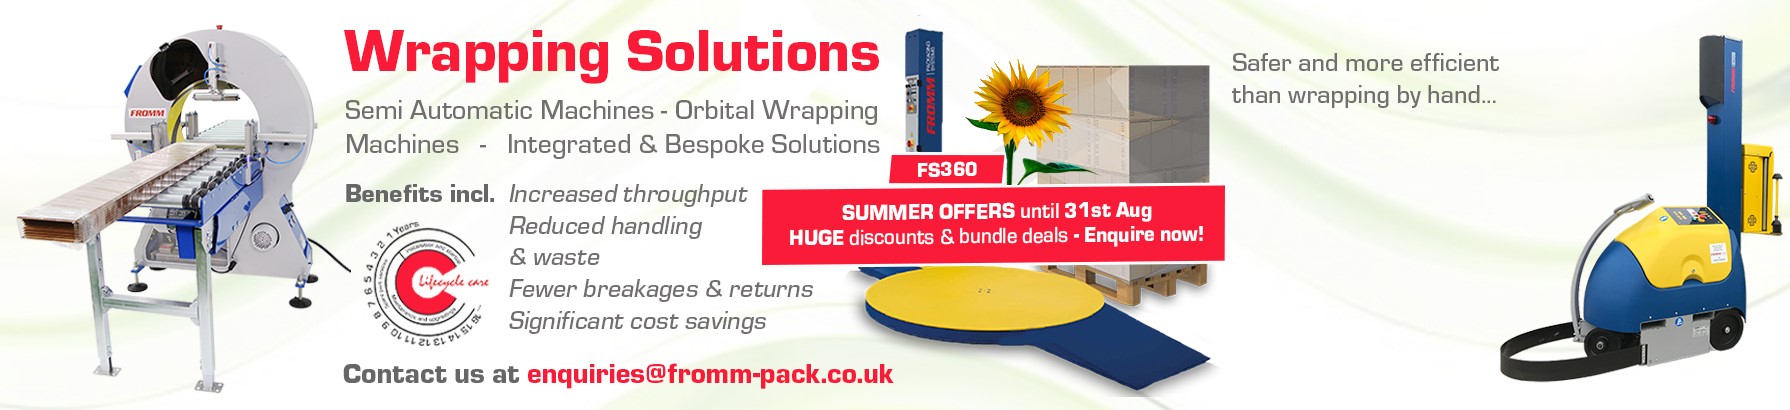 Wrapping Summer Offer